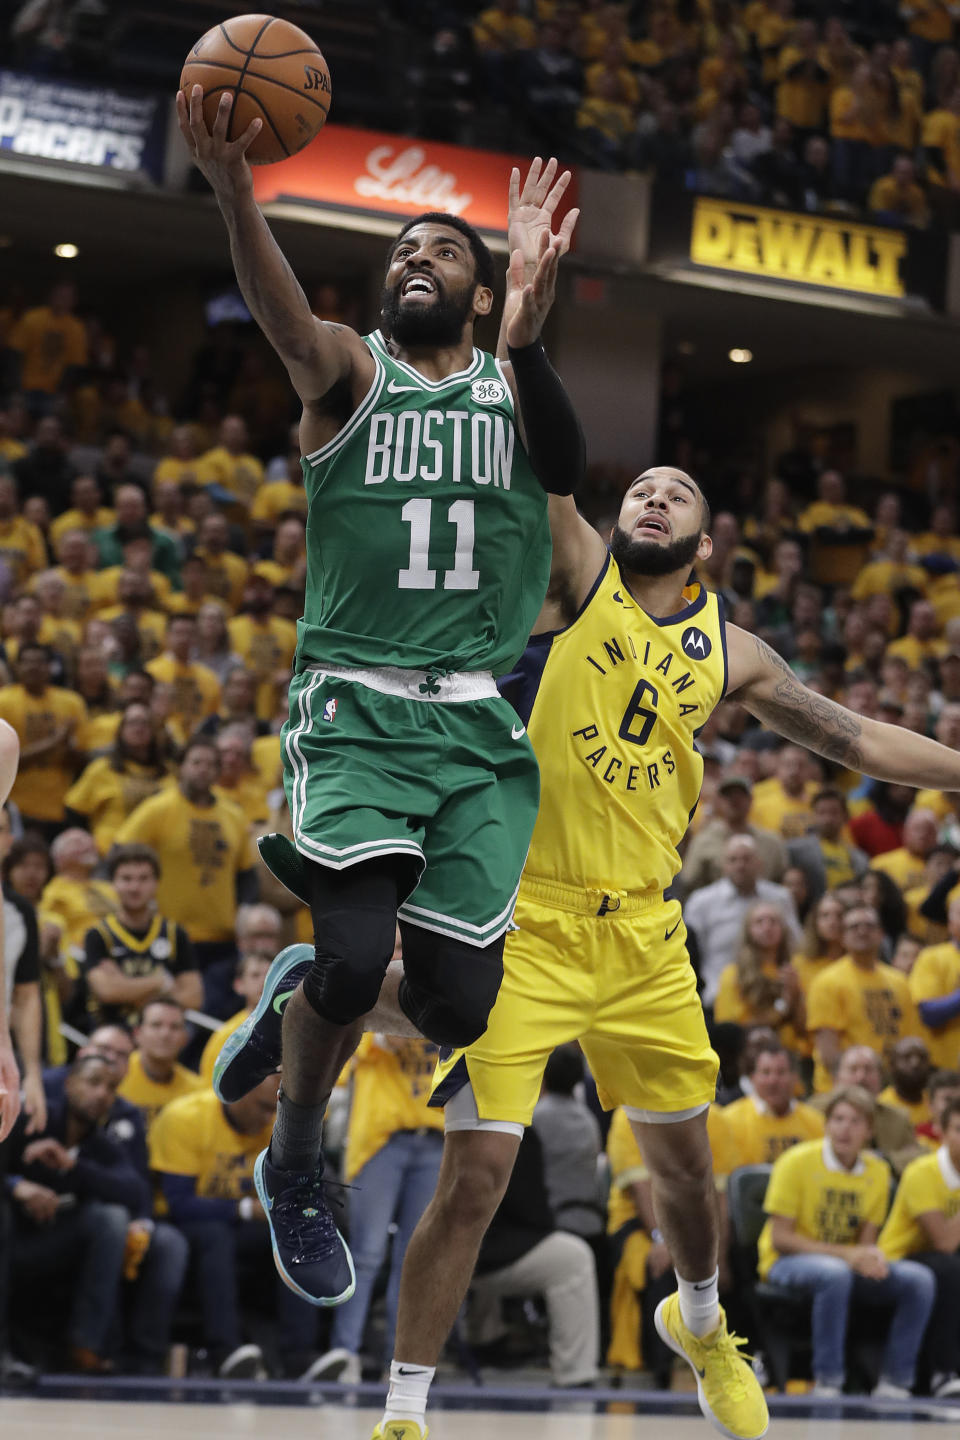 FILE - In this April 19, 2019, file photo, Boston Celtics' Kyrie Irving (11) shoots against Indiana Pacers' Cory Joseph (6) during the second half of Game 3 of an NBA basketball first-round playoff series in Indianapolis. Rarely relevant at the same time on the basketball court, the Knicks and Nets are front and center in the free agency race, two of the teams best positioned to make a splash when the market opens. Both can afford two top players, with hopes of landing not only a Kevin Durant or Kyrie Irving, but possibly even both. (AP Photo/Darron Cummings, File)